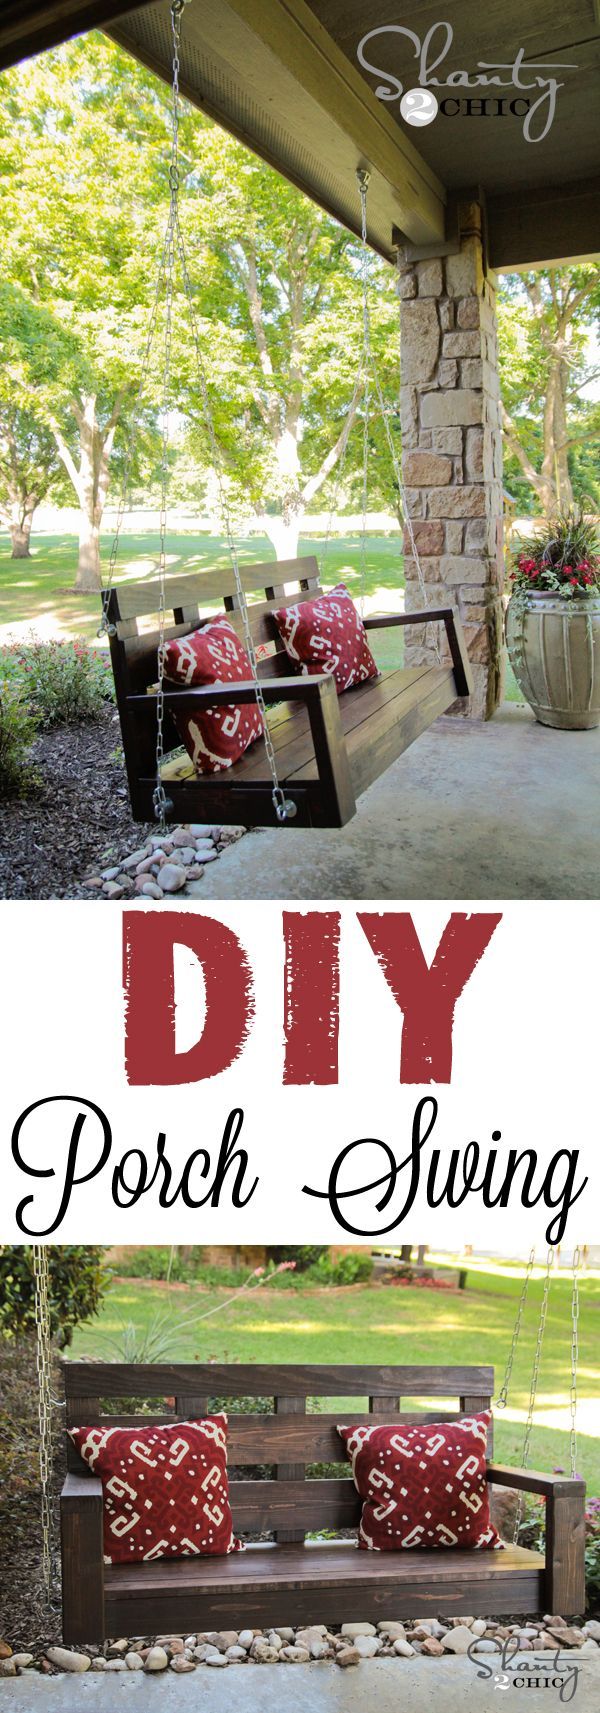 Easy DIY Porch Swing! Yet another reason to own my own home….so I can do cool things like this. #someday